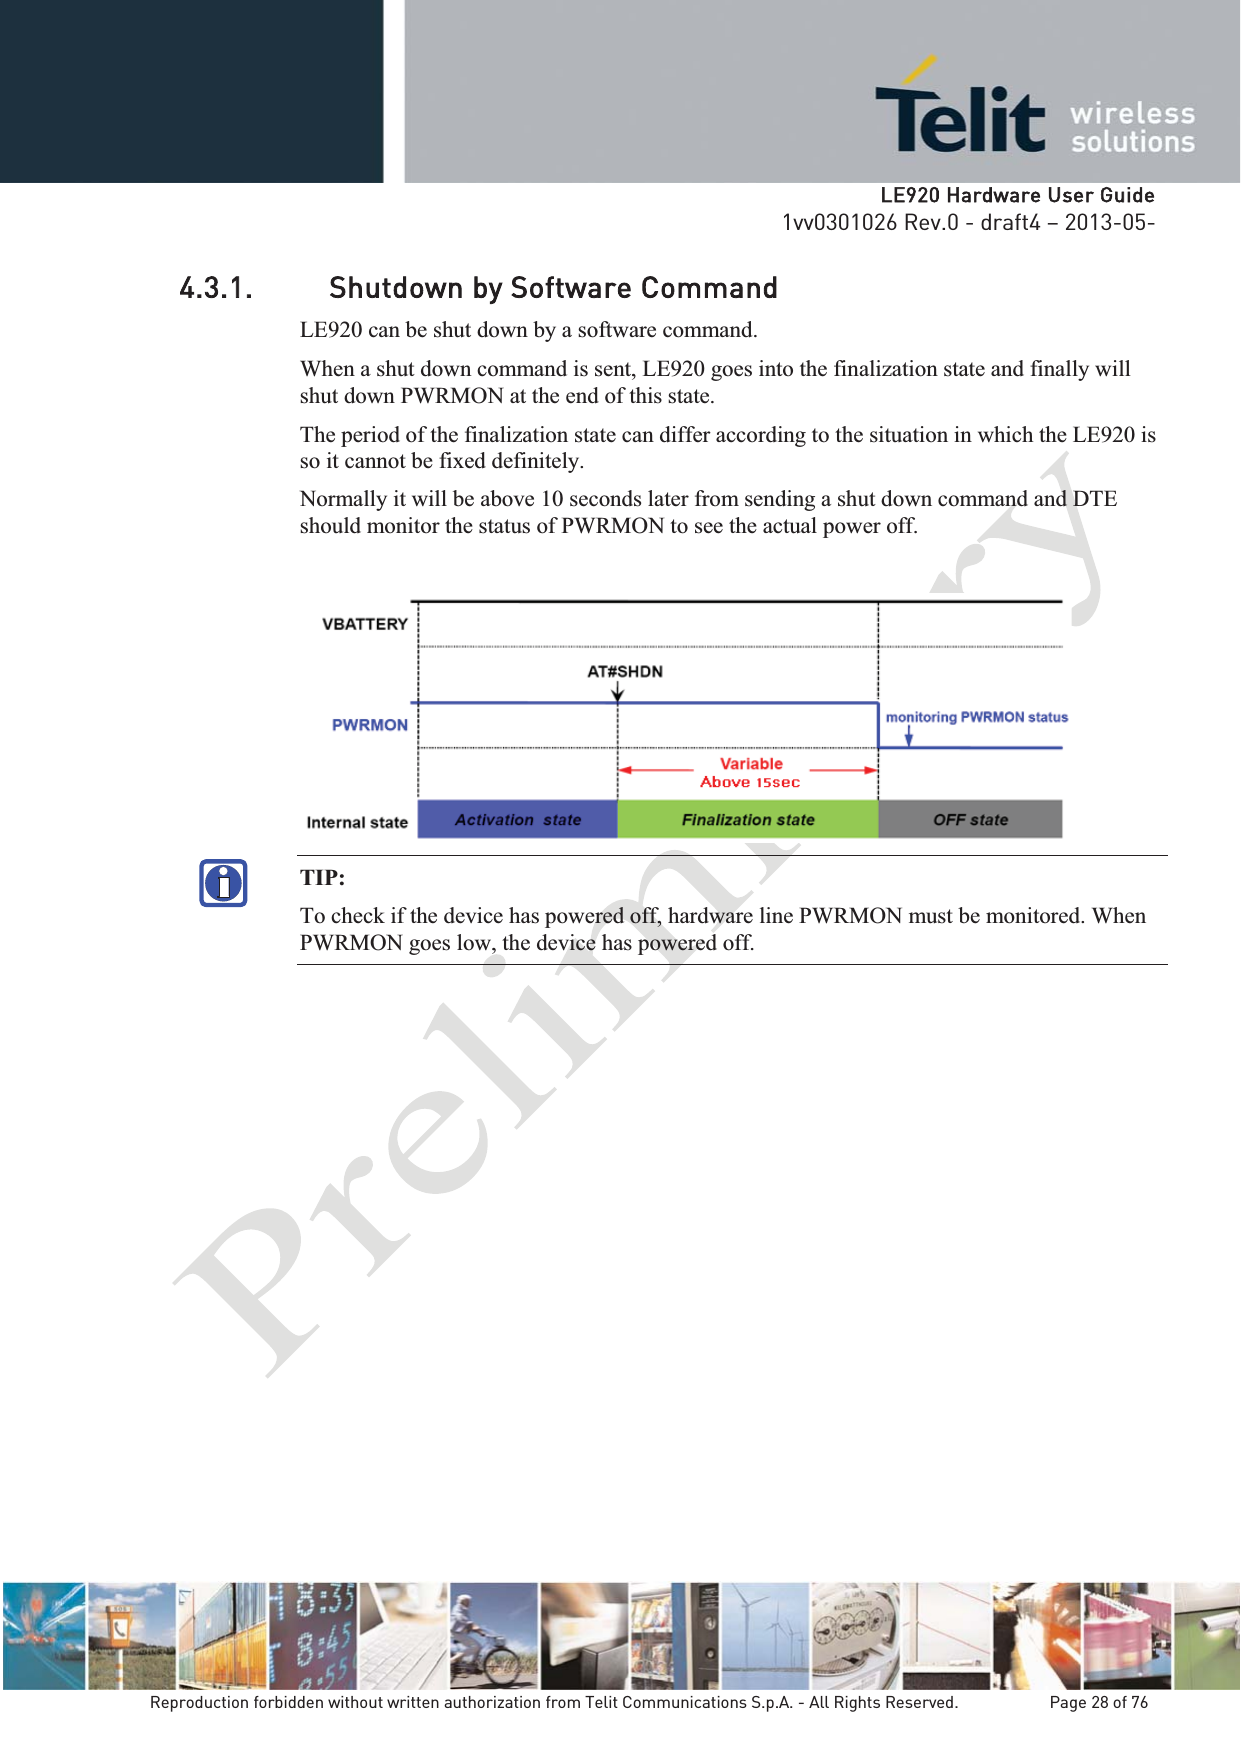   LLE920 Hardware User Guide1vv0301026 Rev.0 - draft4 – 2013-05-Reproduction forbidden without written authorization from Telit Communications S.p.A. - All Rights Reserved.    Page 28 of 76 4.3.1. Shutdown by Software Command LE920 can be shut down by a software command. When a shut down command is sent, LE920 goes into the finalization state and finally will shut down PWRMON at the end of this state. The period of the finalization state can differ according to the situation in which the LE920 is so it cannot be fixed definitely. Normally it will be above 10 seconds later from sending a shut down command and DTE should monitor the status of PWRMON to see the actual power off.   TIP:  To check if the device has powered off, hardware line PWRMON must be monitored. When PWRMON goes low, the device has powered off. 